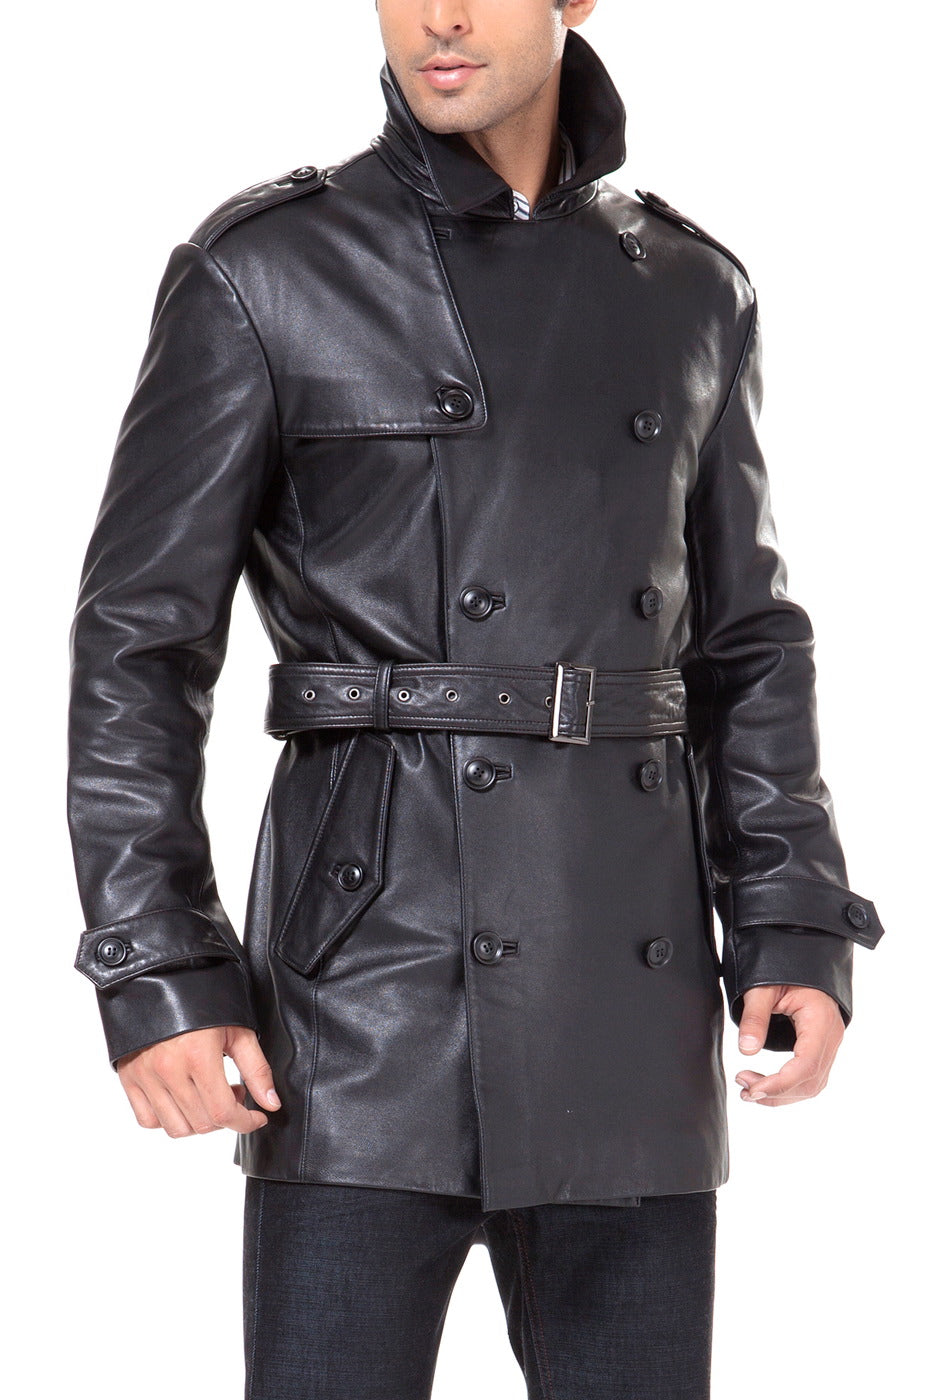 BGSD Men Damian New Zealand Lambskin Leather Belted Trench Coat